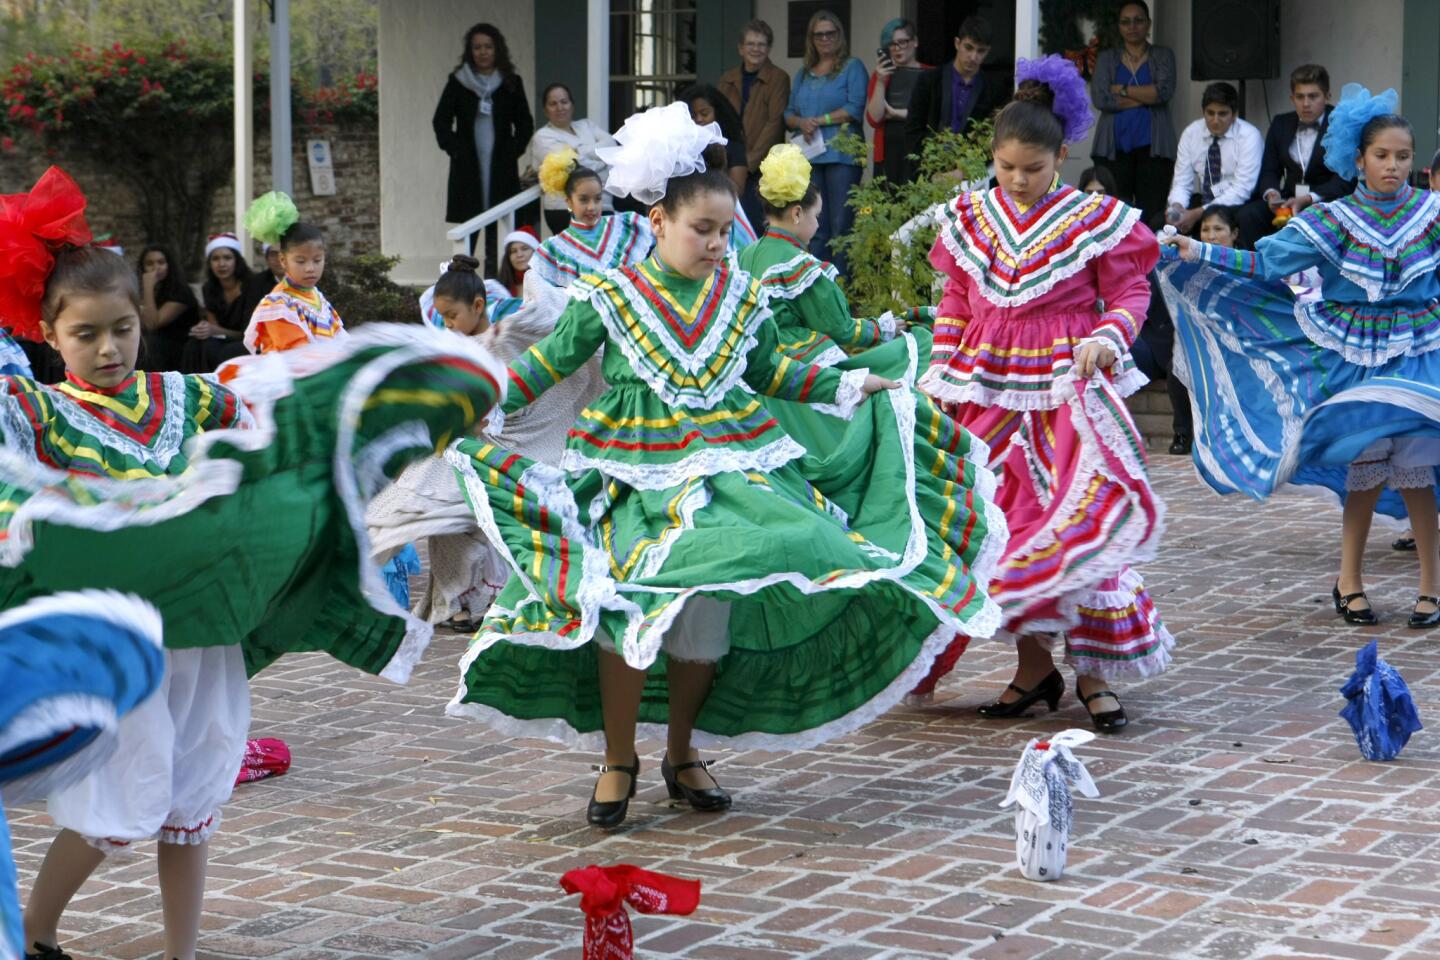 The Balet Folklorico Horace Mann, from Horace Mann Elementary School, performed for crowds gathered at the Fiesta De Las Luminarias, at Casa Adobe de San Rafael, in Glendale on Saturday, Dec. 10, 2016.